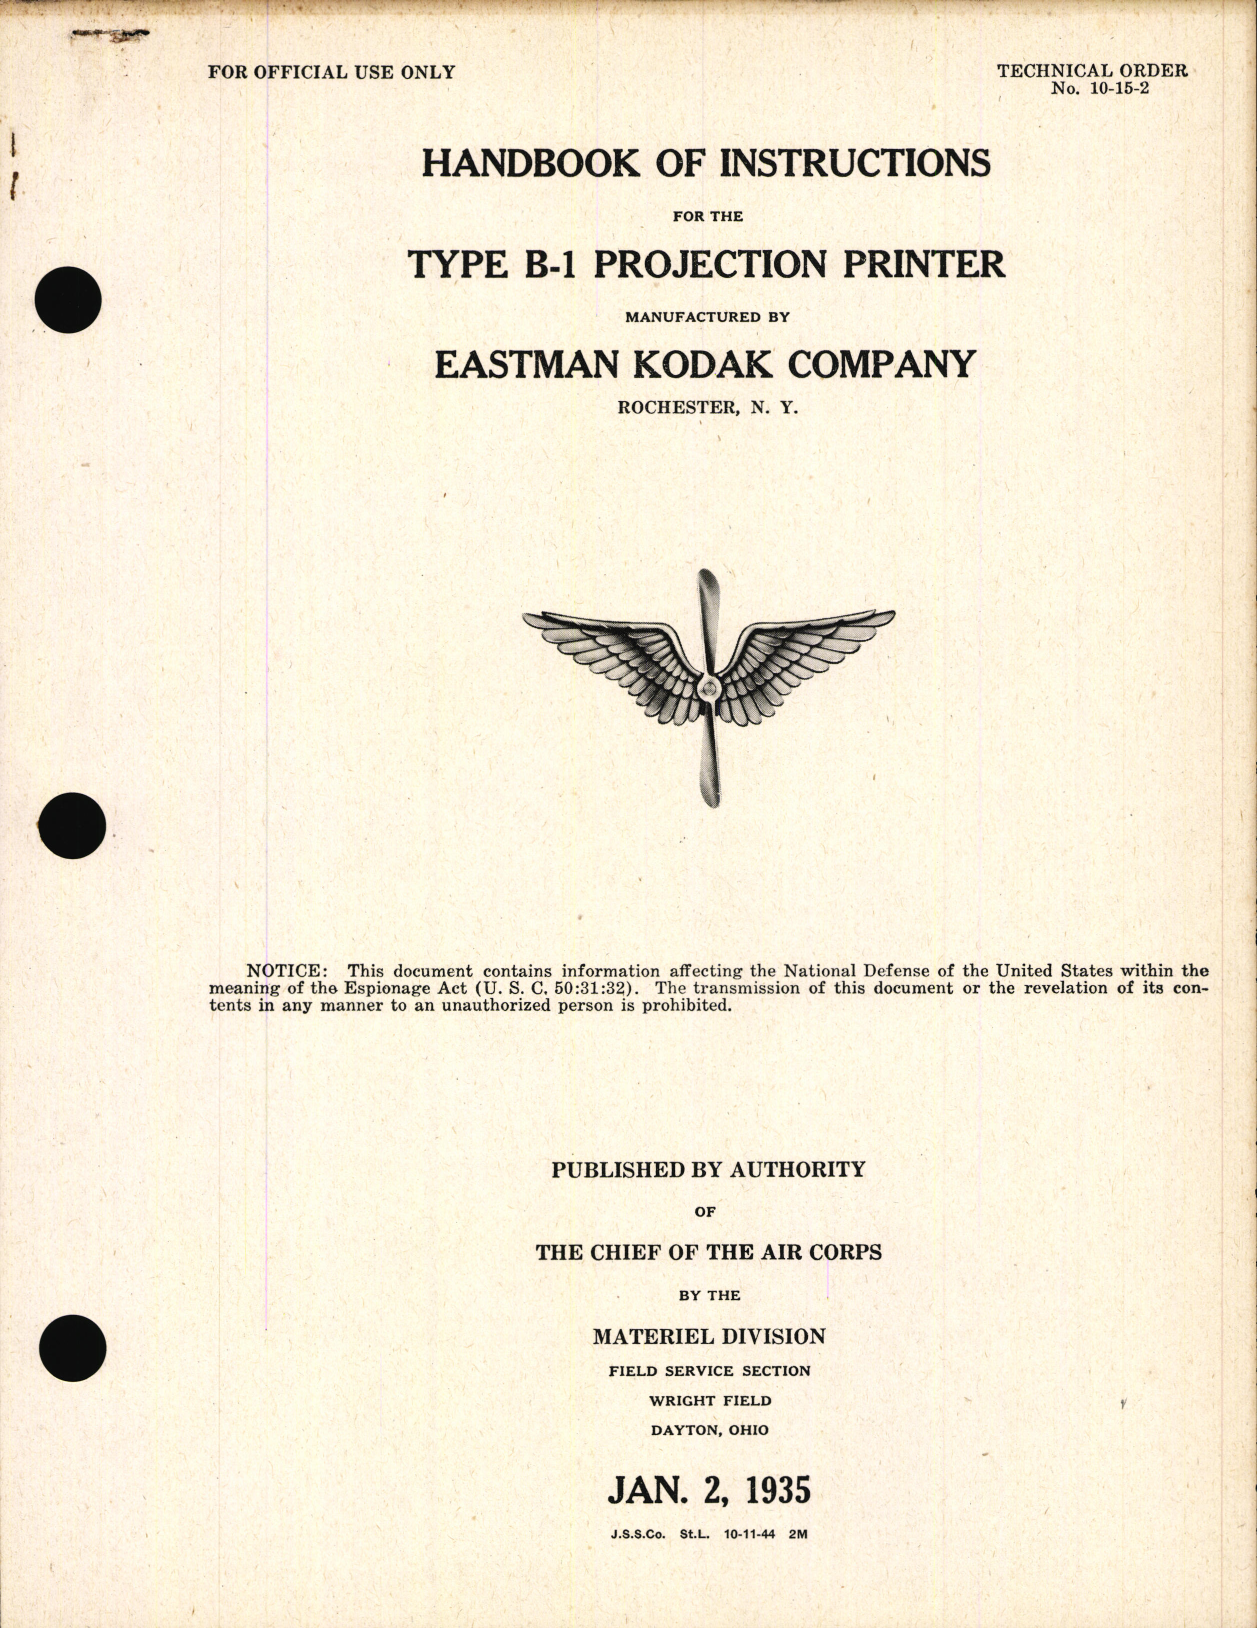 Sample page 1 from AirCorps Library document: Handbook of Instructions for Type B-1 Projection Printer